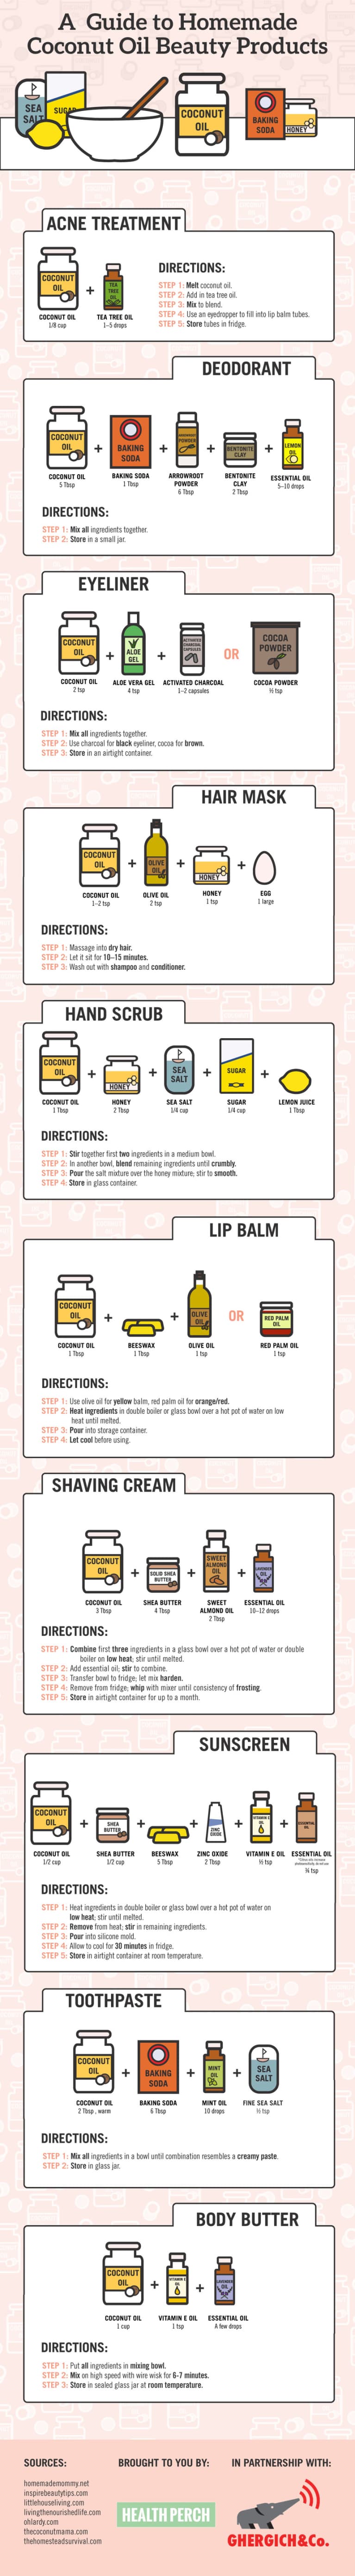 A Guide To DIY Coconut Oil Beauty Products (Infographic)